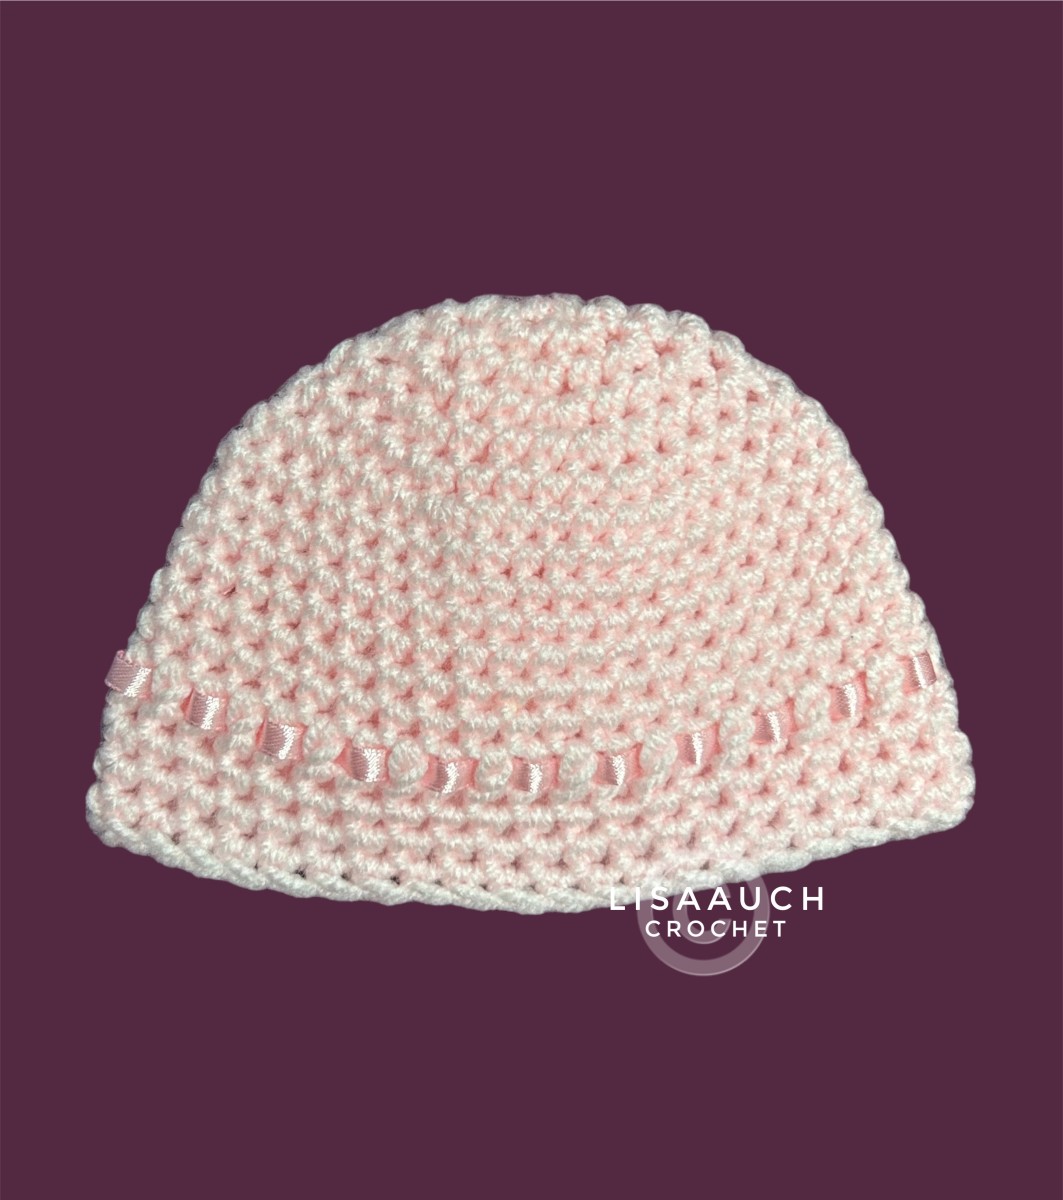 How to Crochet a Baby Hat for Beginners (Step-by-Step Photos)